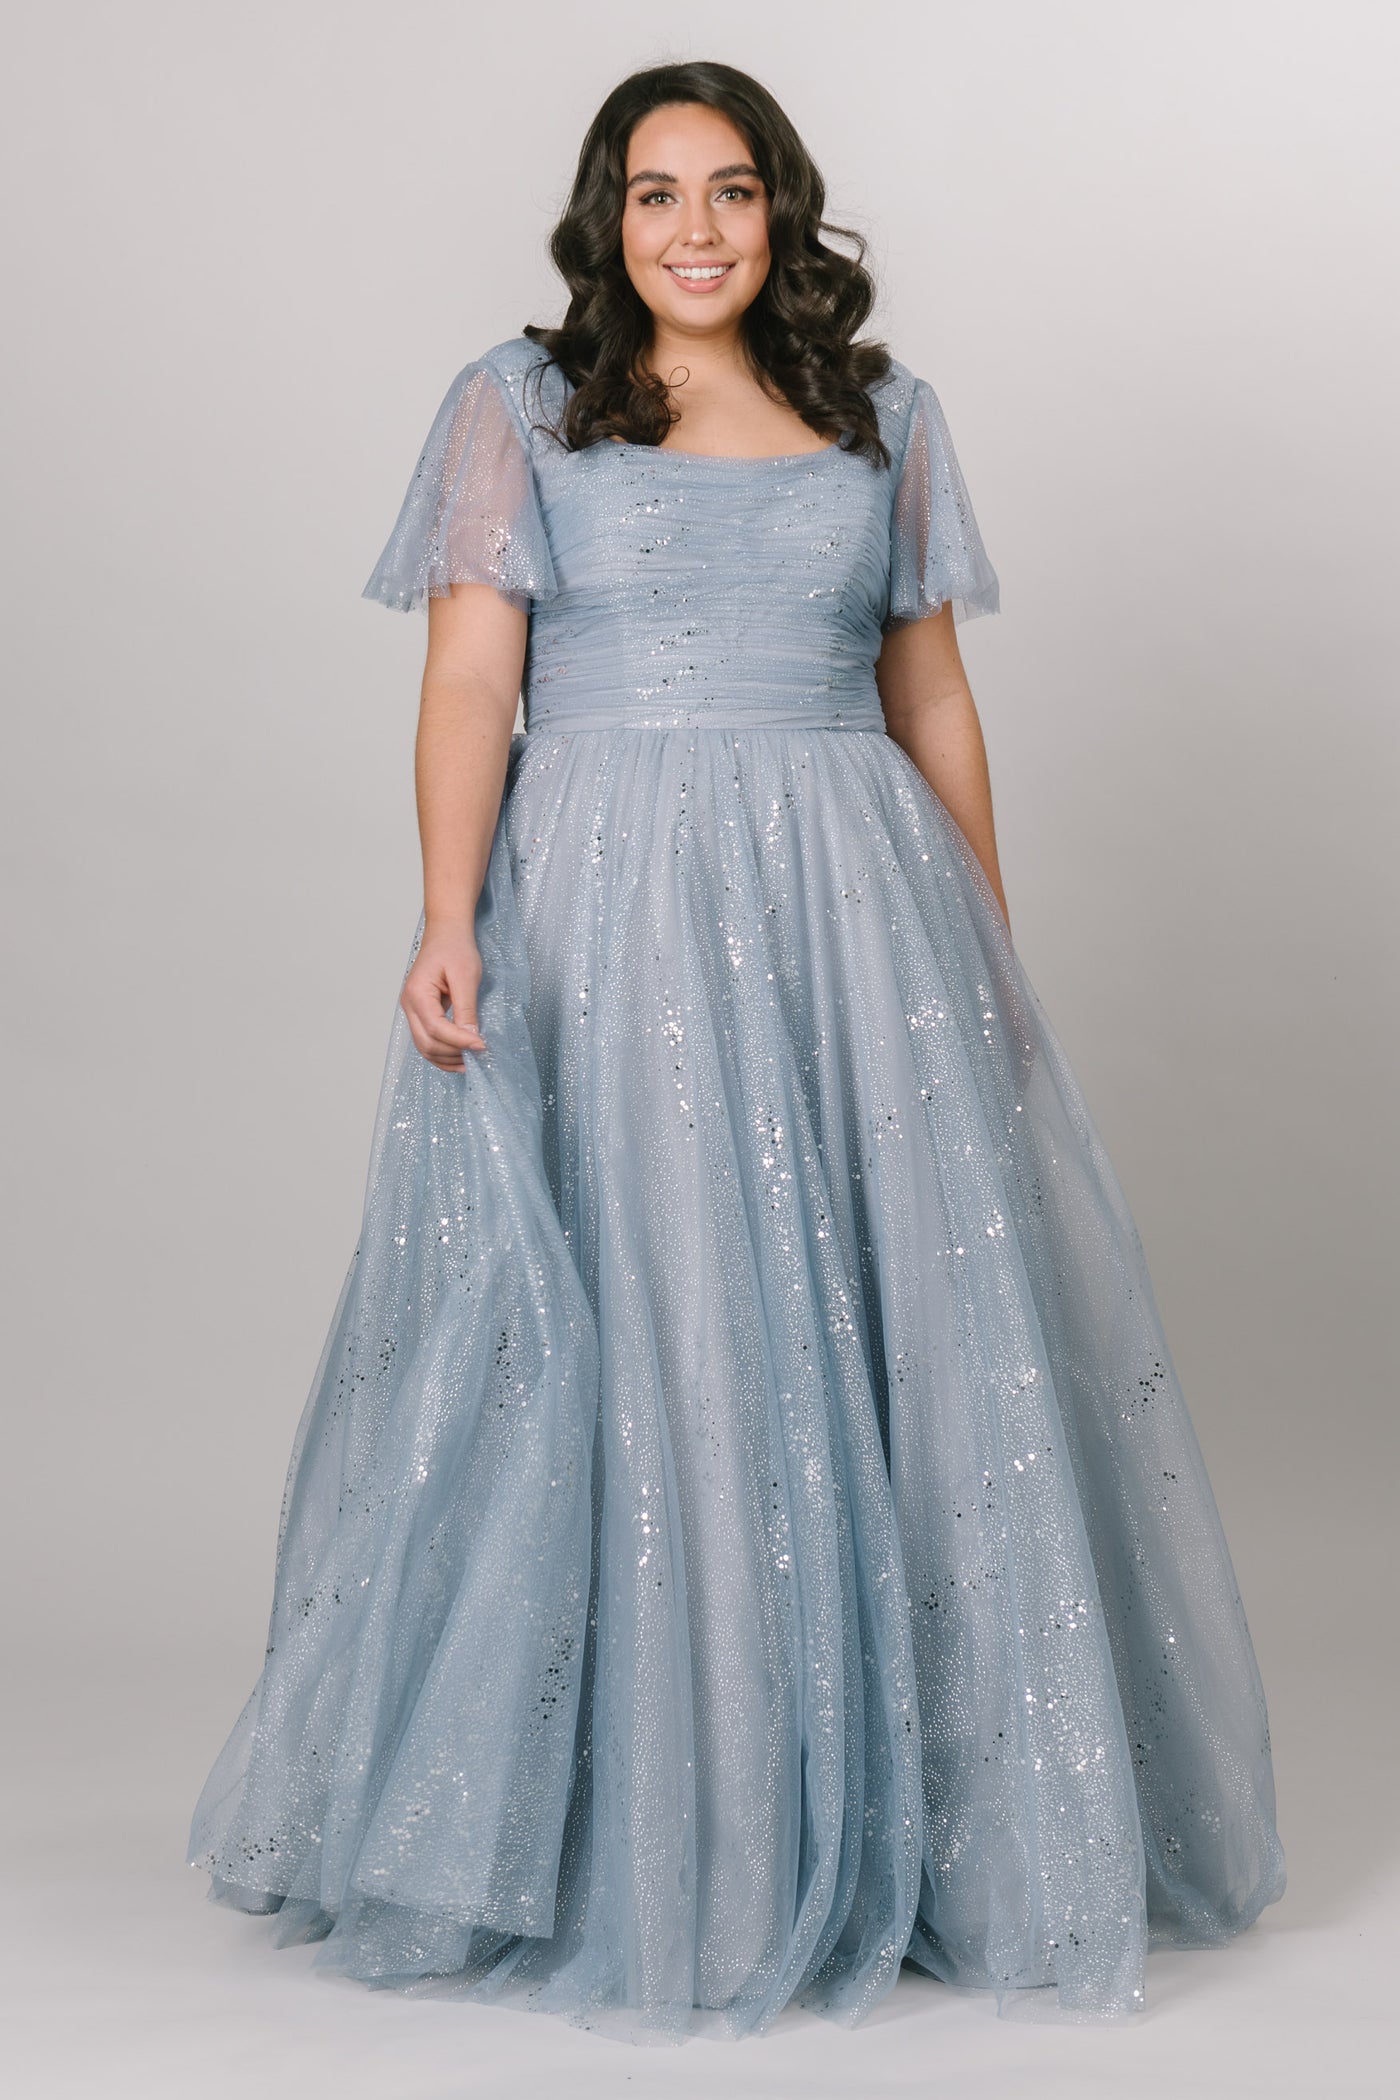 Modest Dresses - Modest Prom Dress - Formalwear Modest Dresses - Bridesmaid Modest Dresses.  Slate ballgown with flutter sleeves and a  square neckline and the whole dress has sequins.